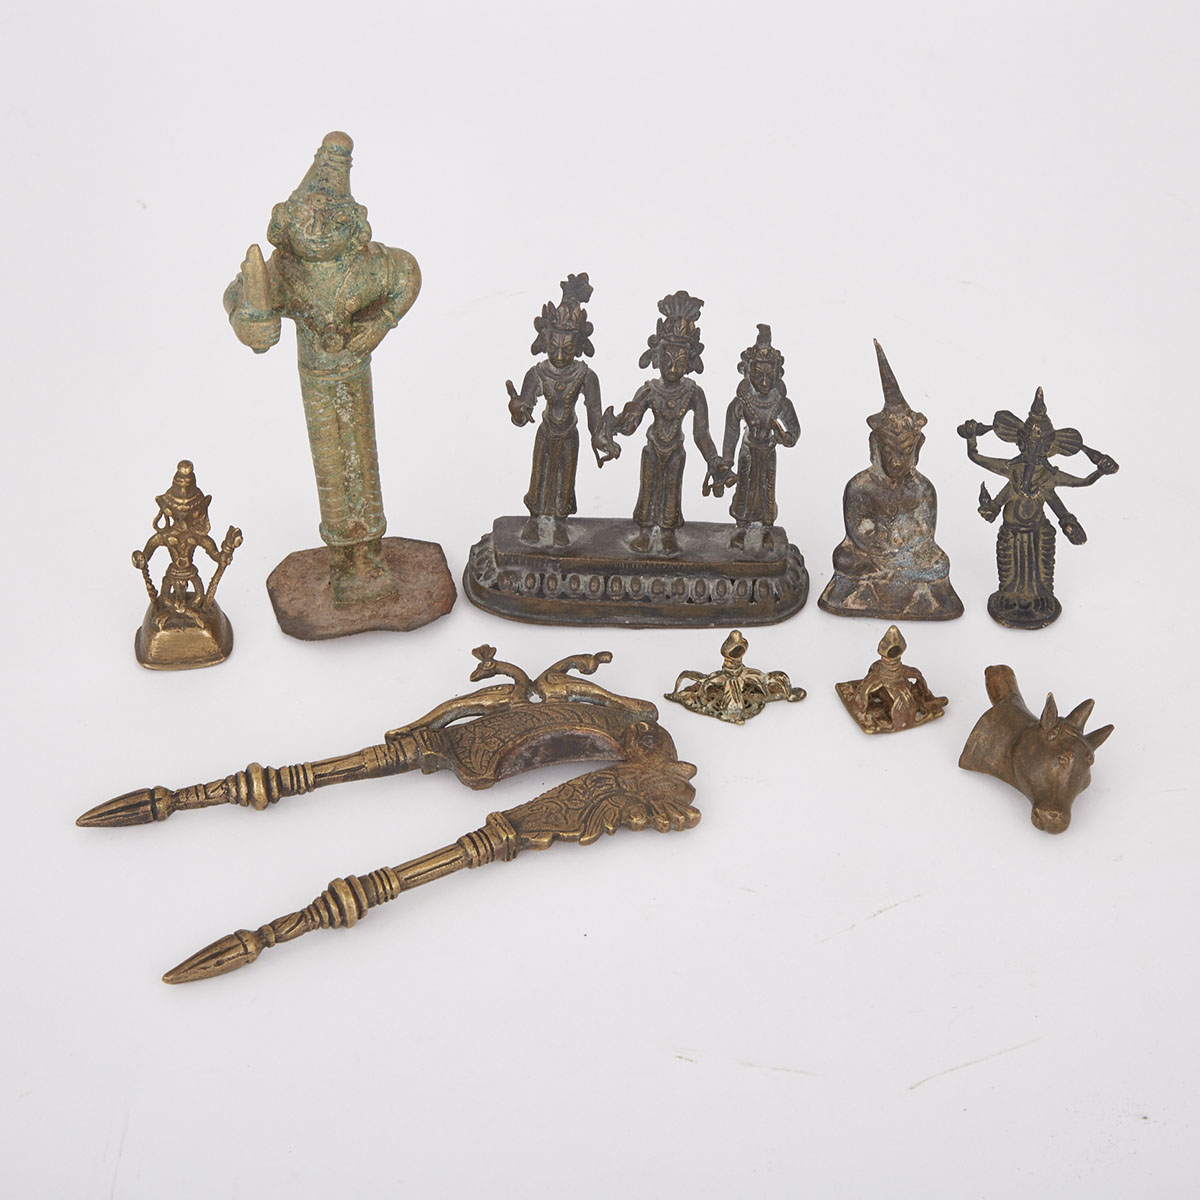 A Group of Tibetan and Southeast Asian Bronzes, 18th/19th Century